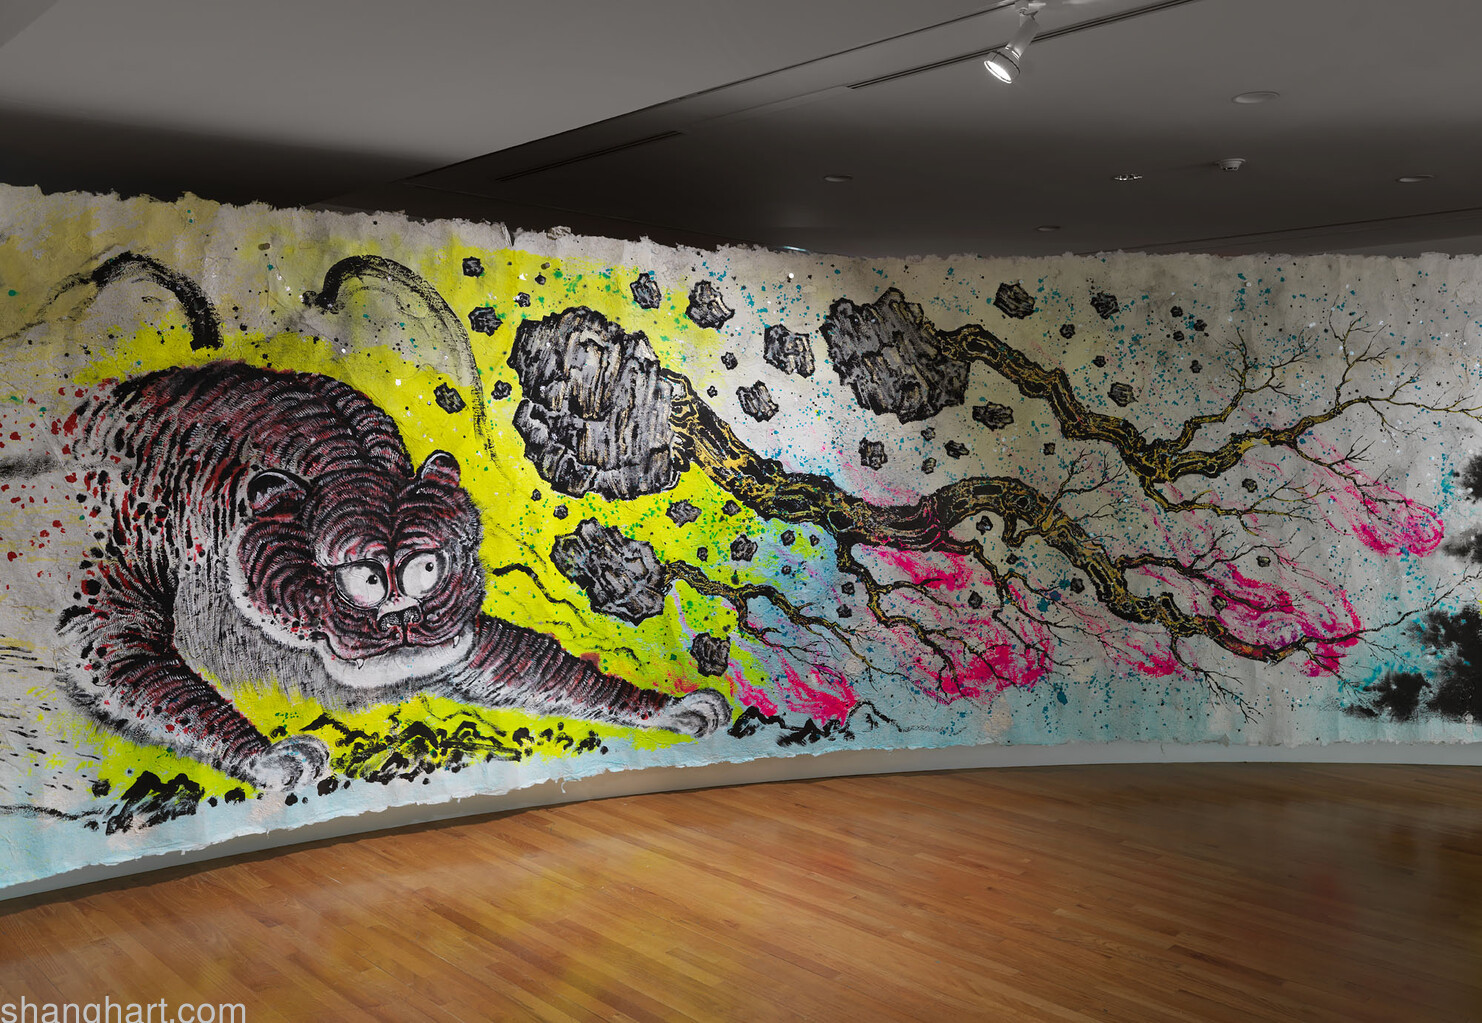 Installation view of Sun Xun: Mythological Time, exhibition at the Vancouver Art Gallery, February 20th to September 6th, 2021 Photo: Ian Lefebvre, Vancouver Art Gallery